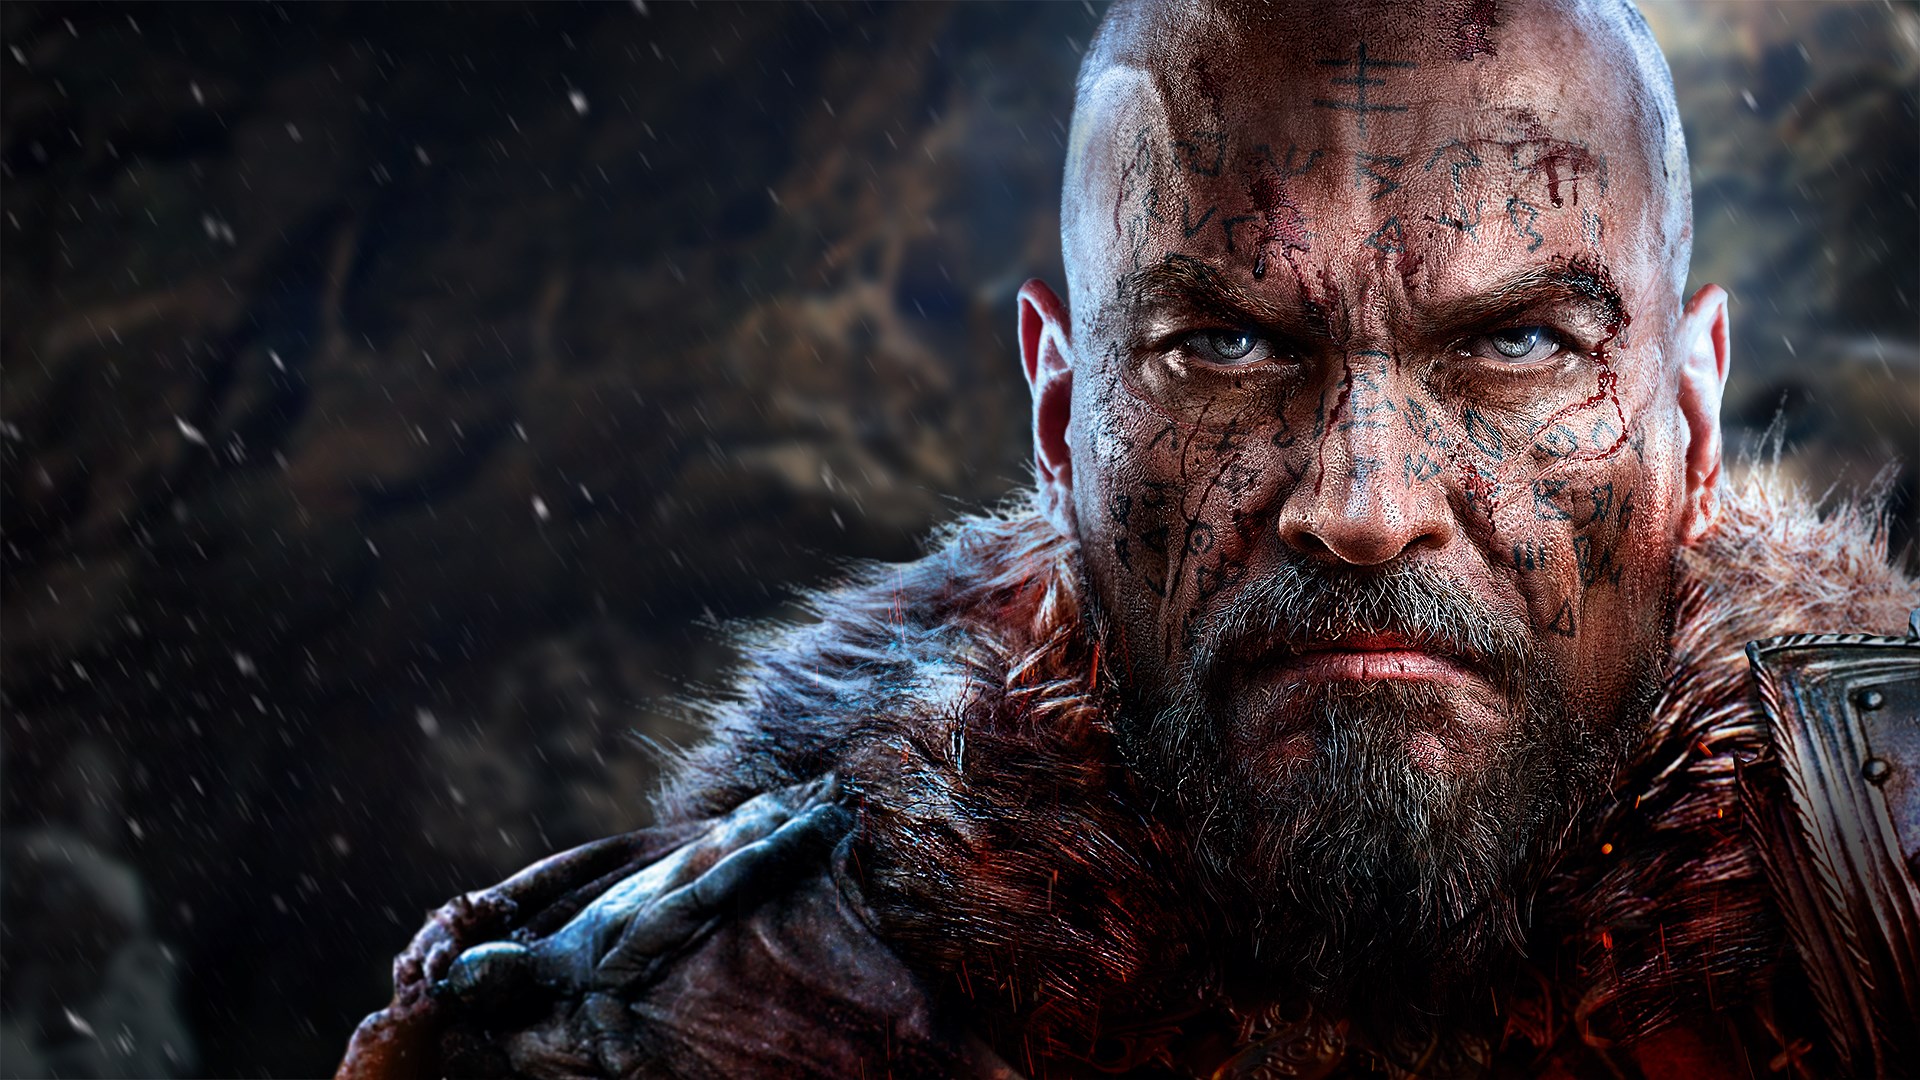 This new Lords of the Fallen PS4 gameplay looks a lot like Dark